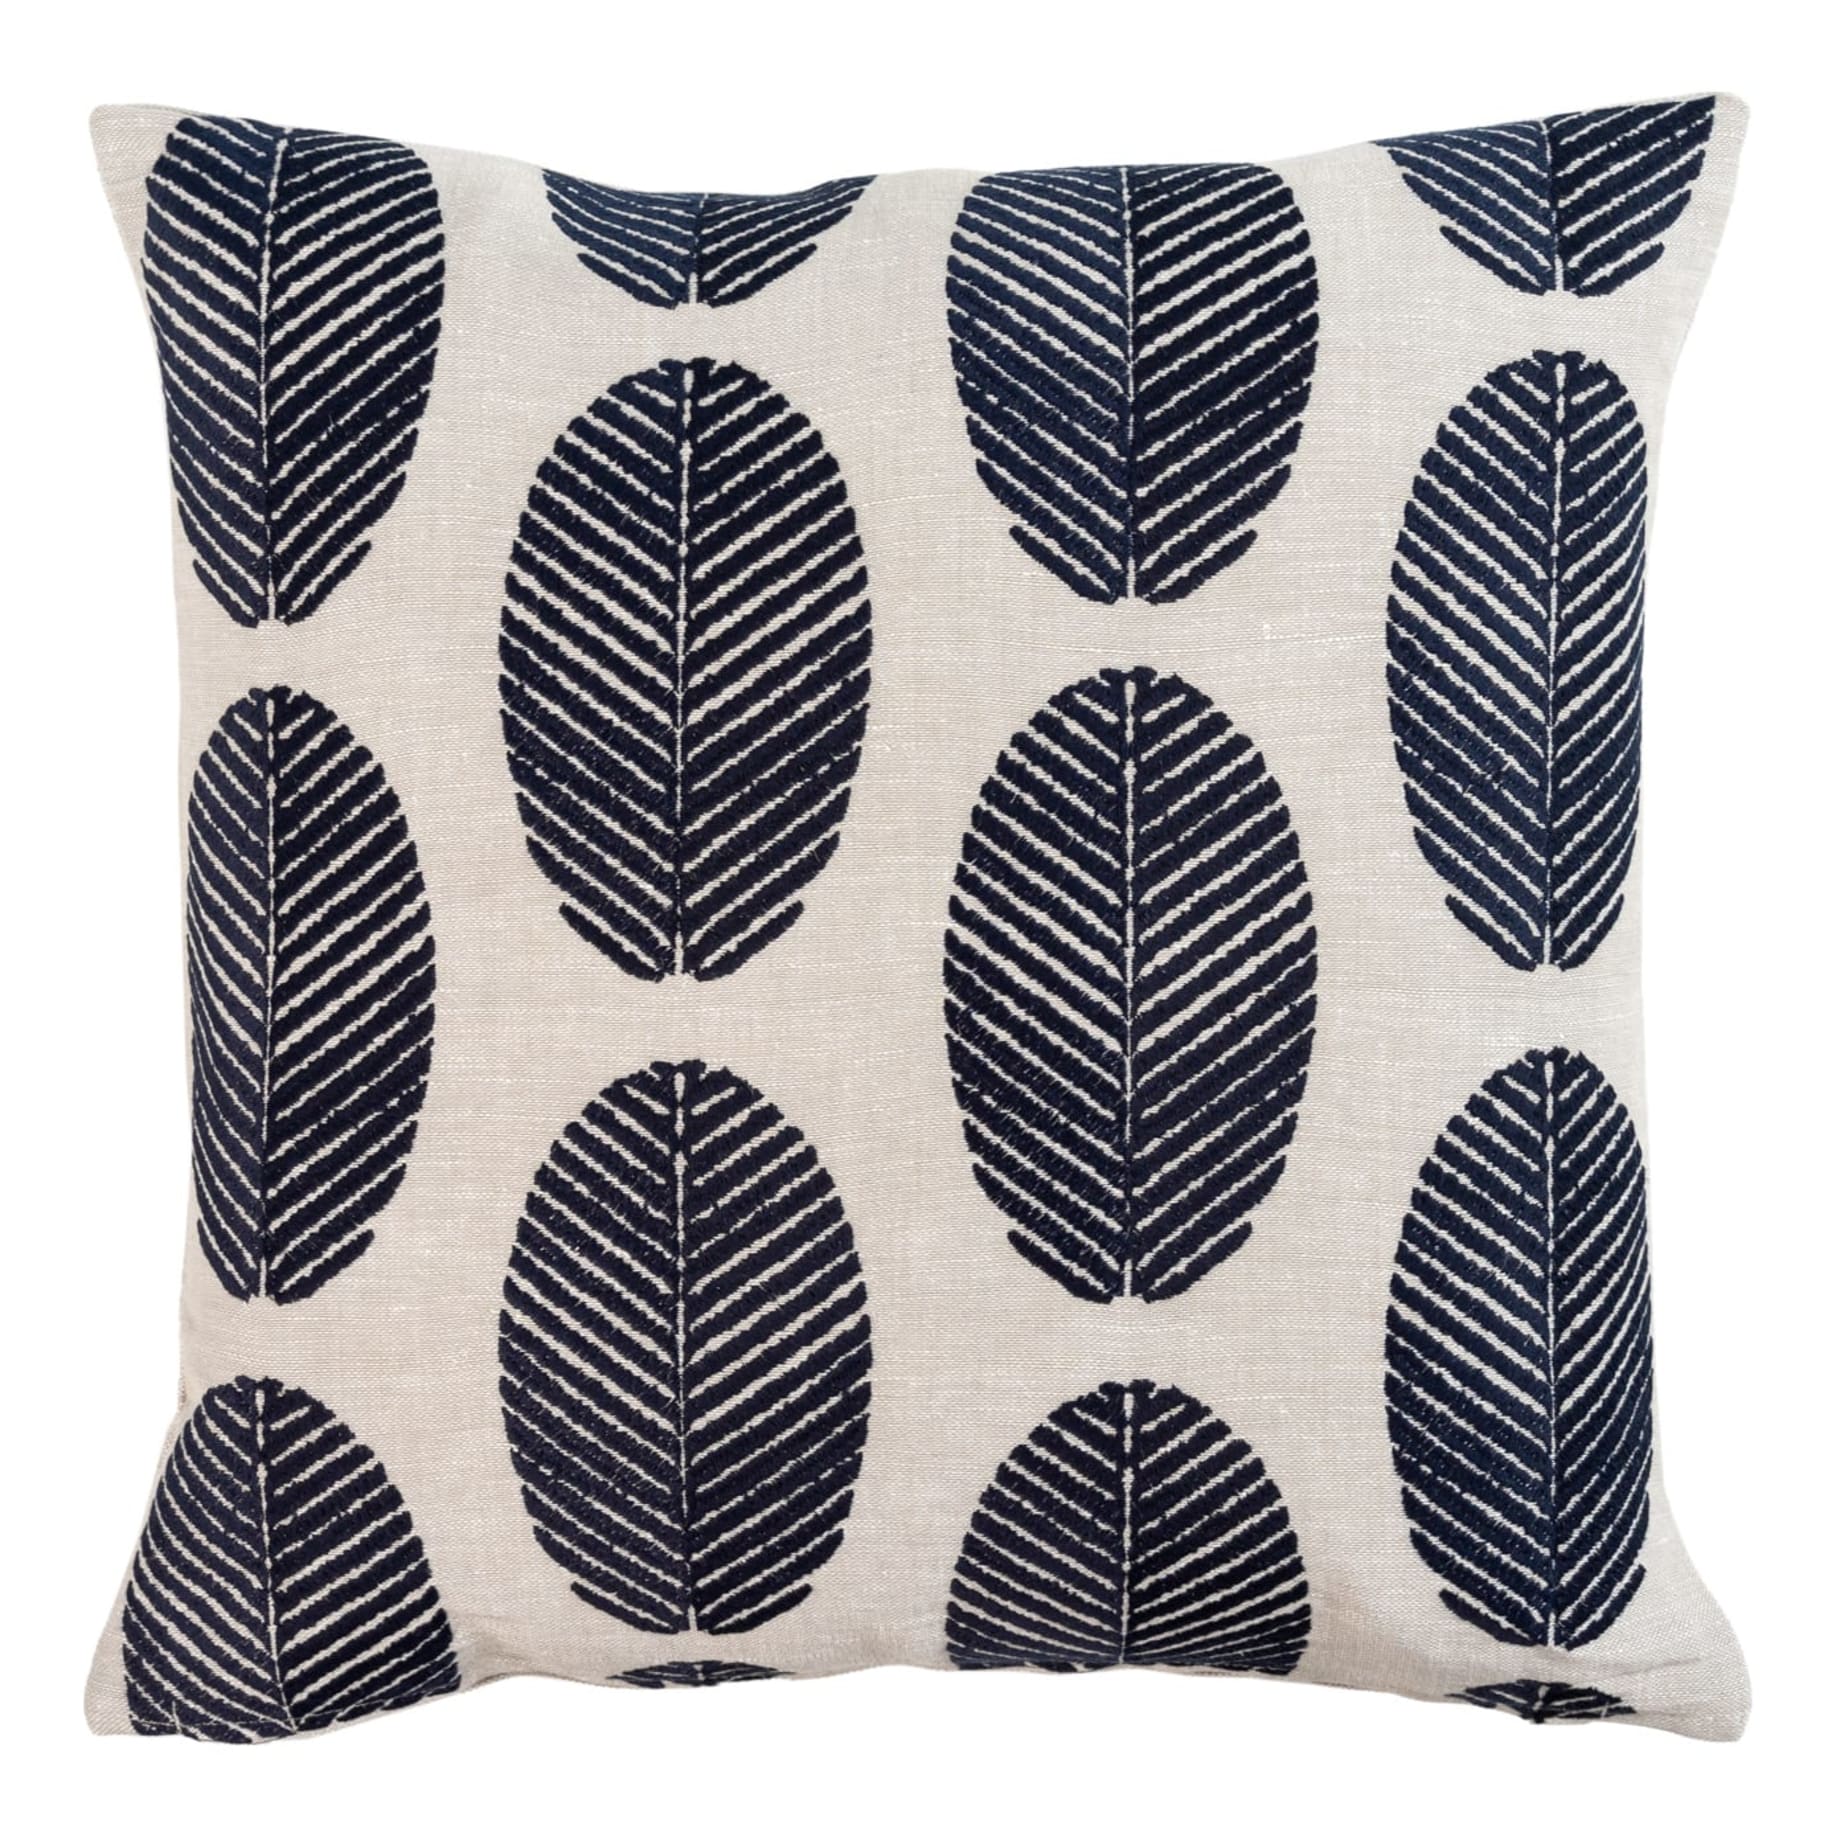 Vermont Feather Fill Cushion 50x50cm in Midnight